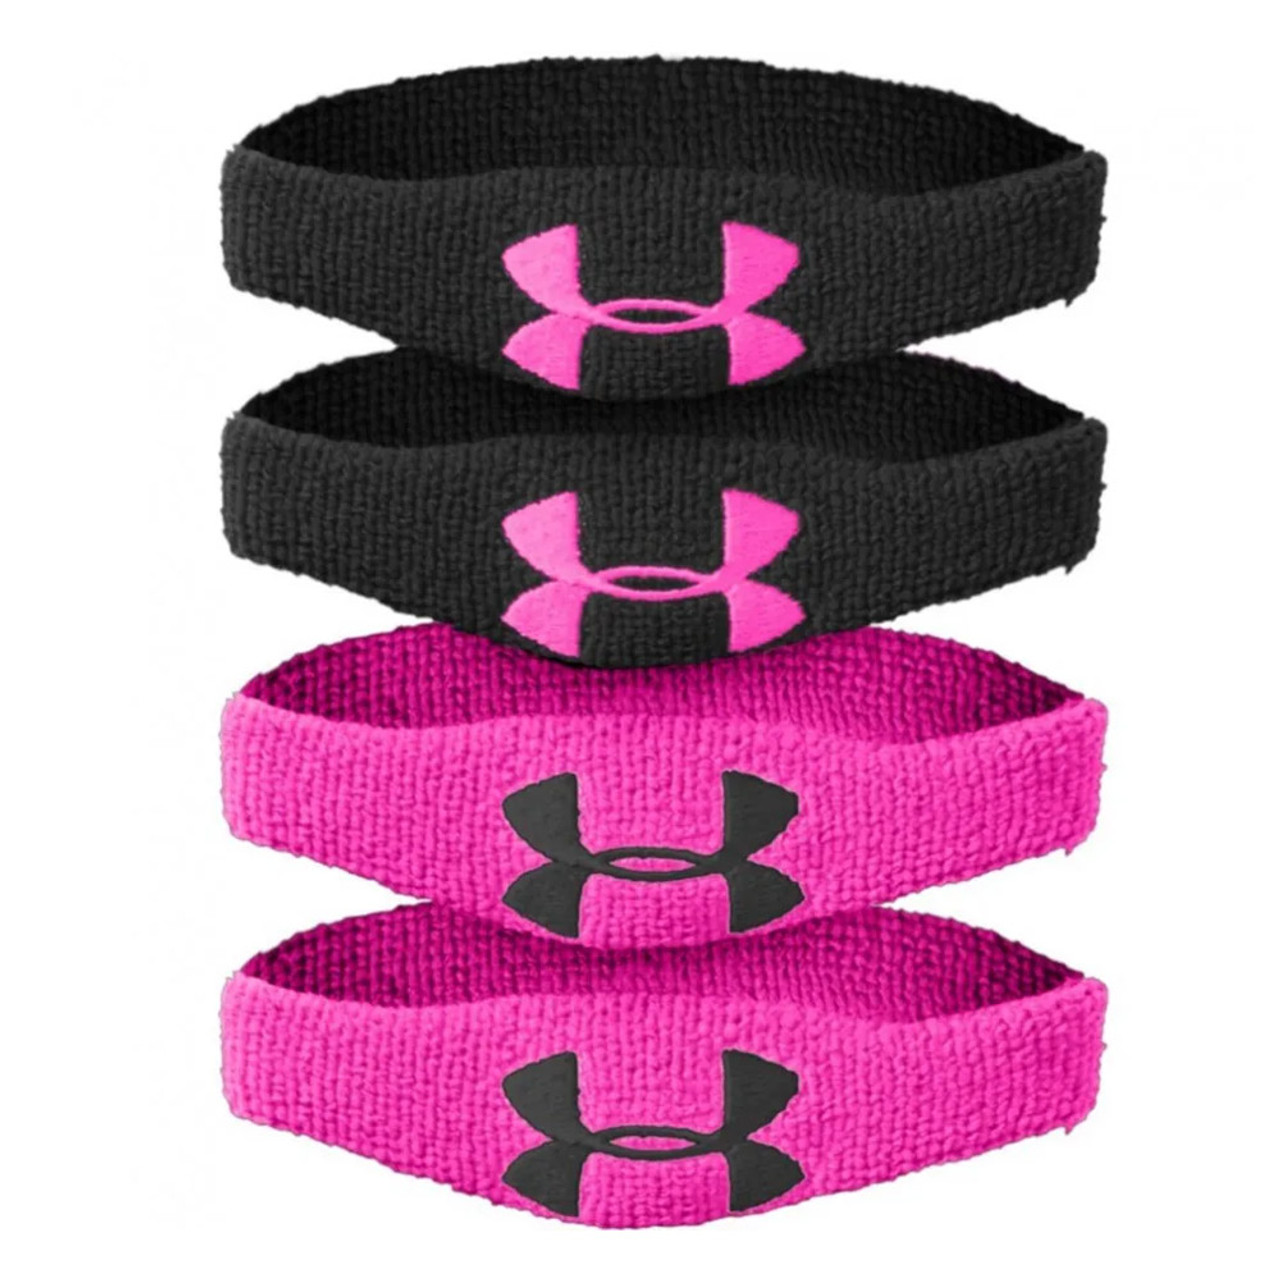 Buy Under Armour Oversized Arm Bands 